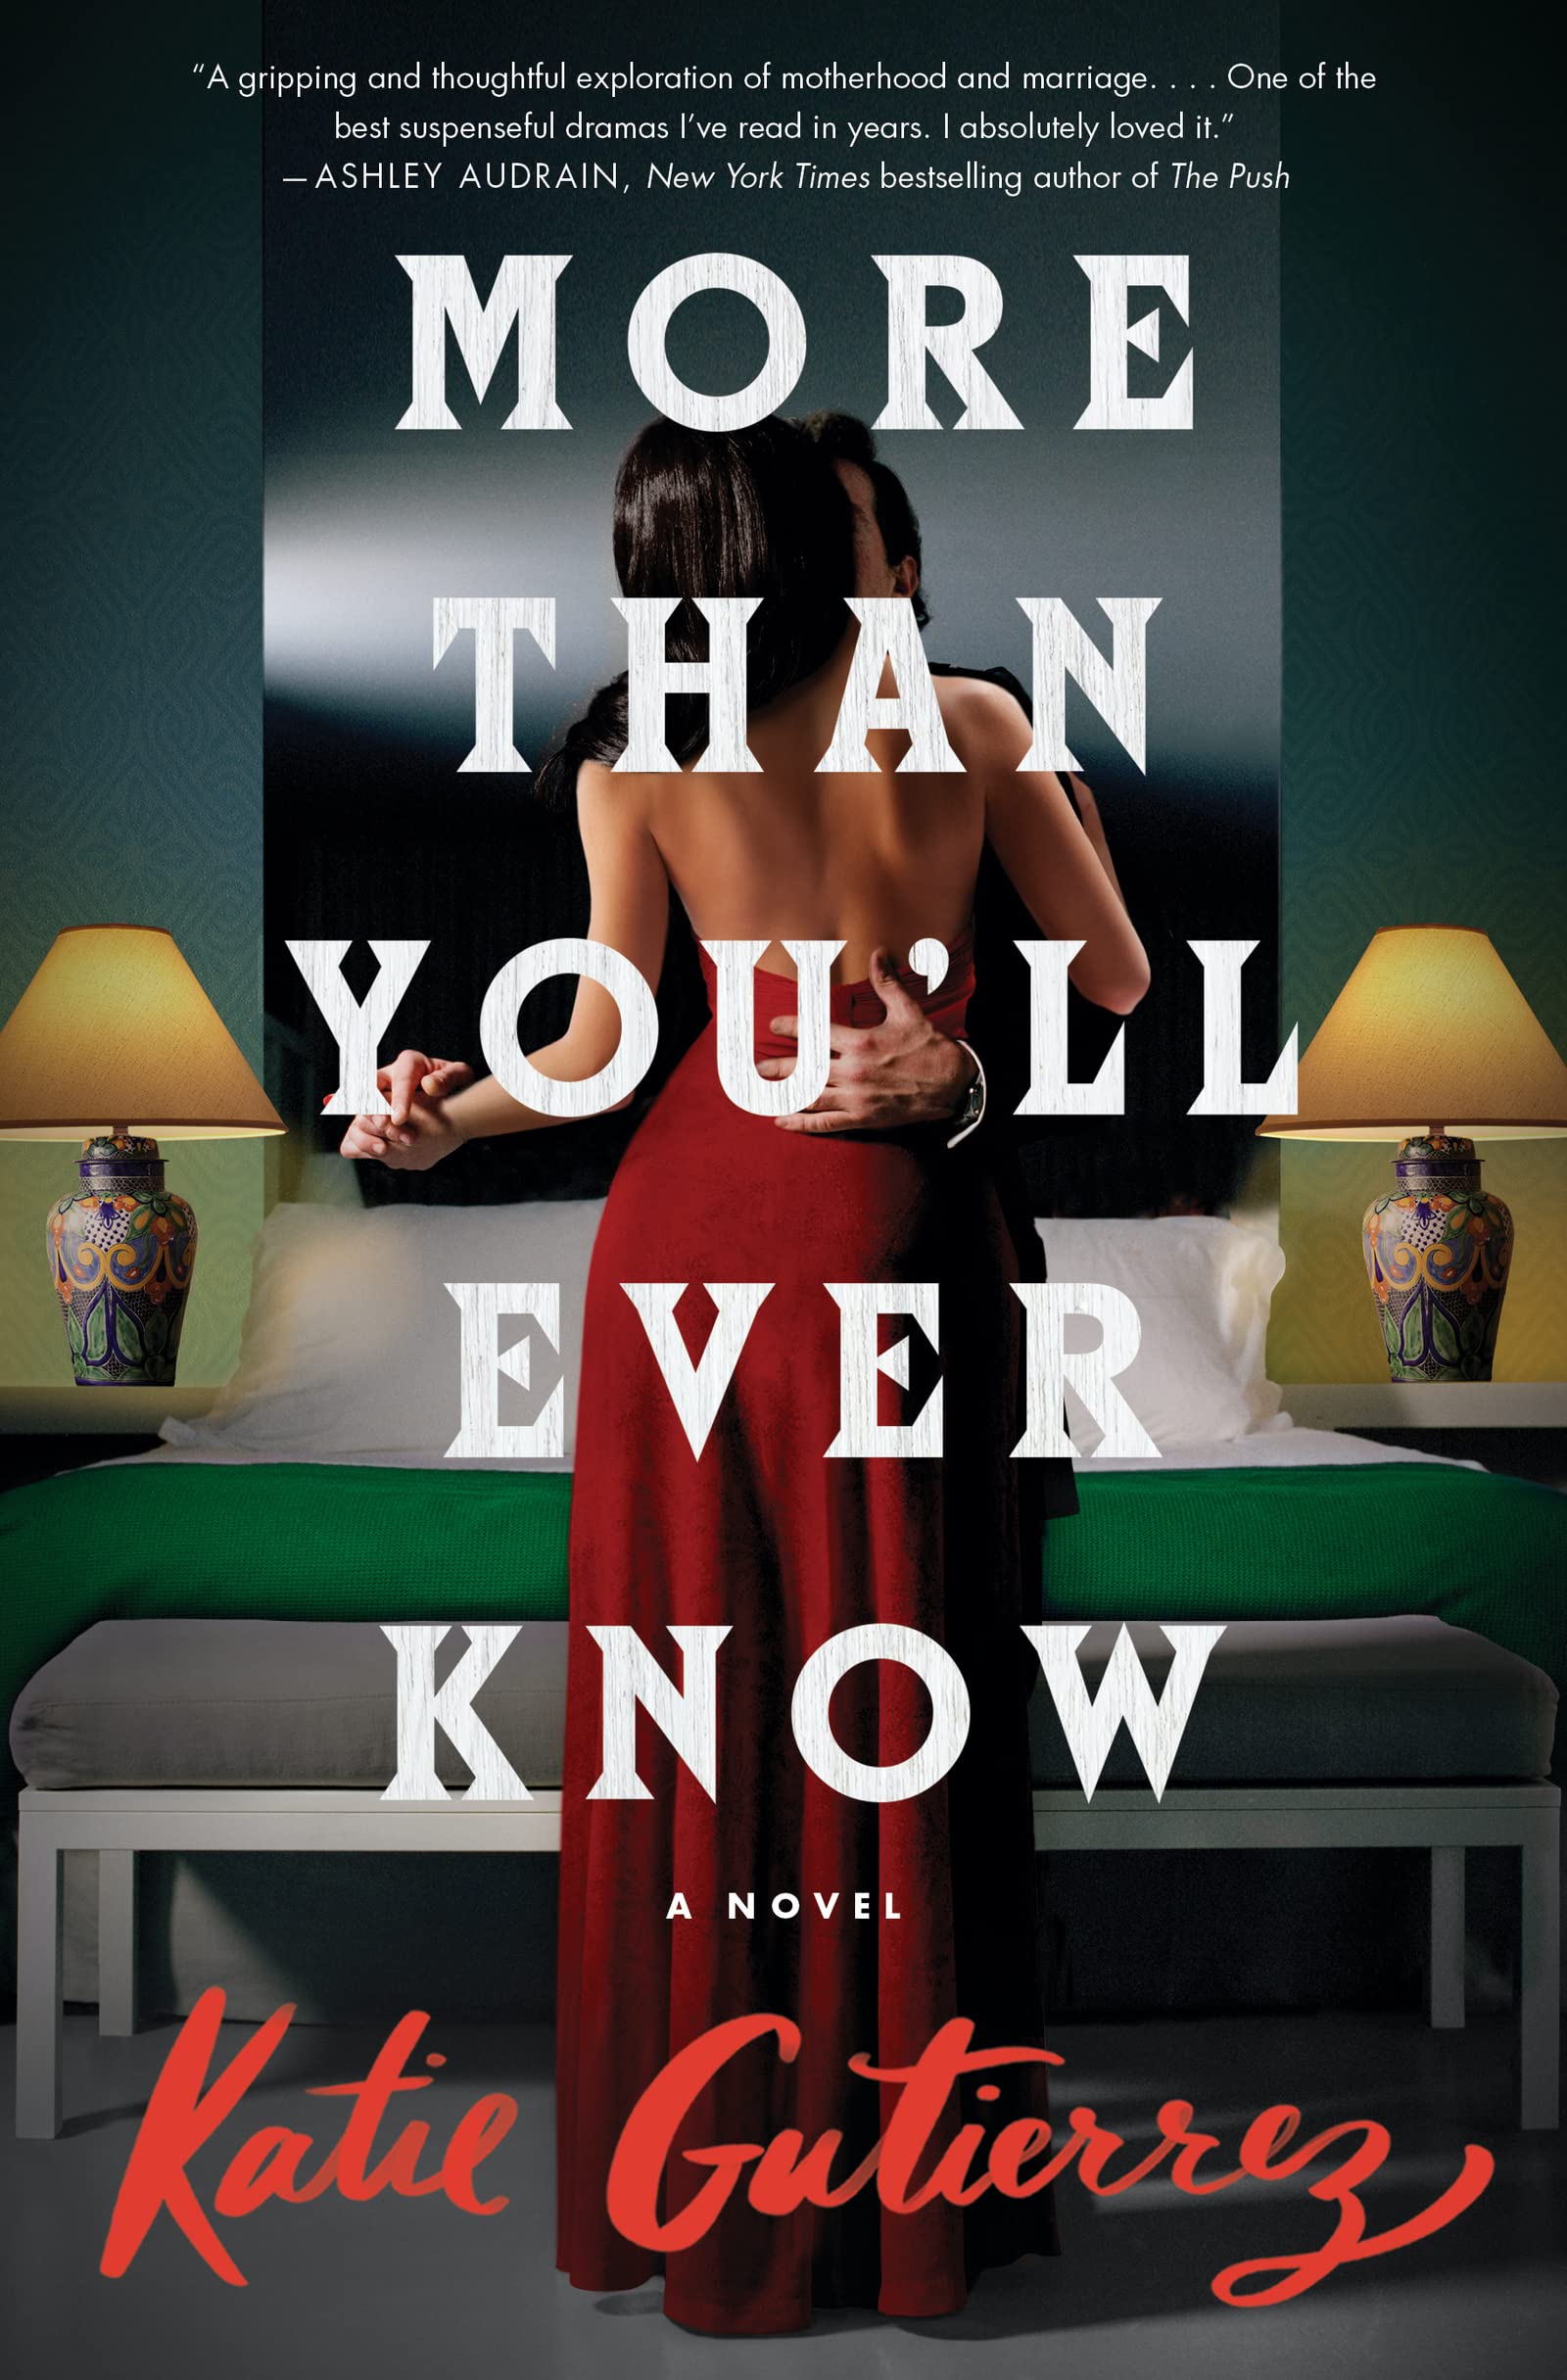 Image for "More Than You'll ever Know"